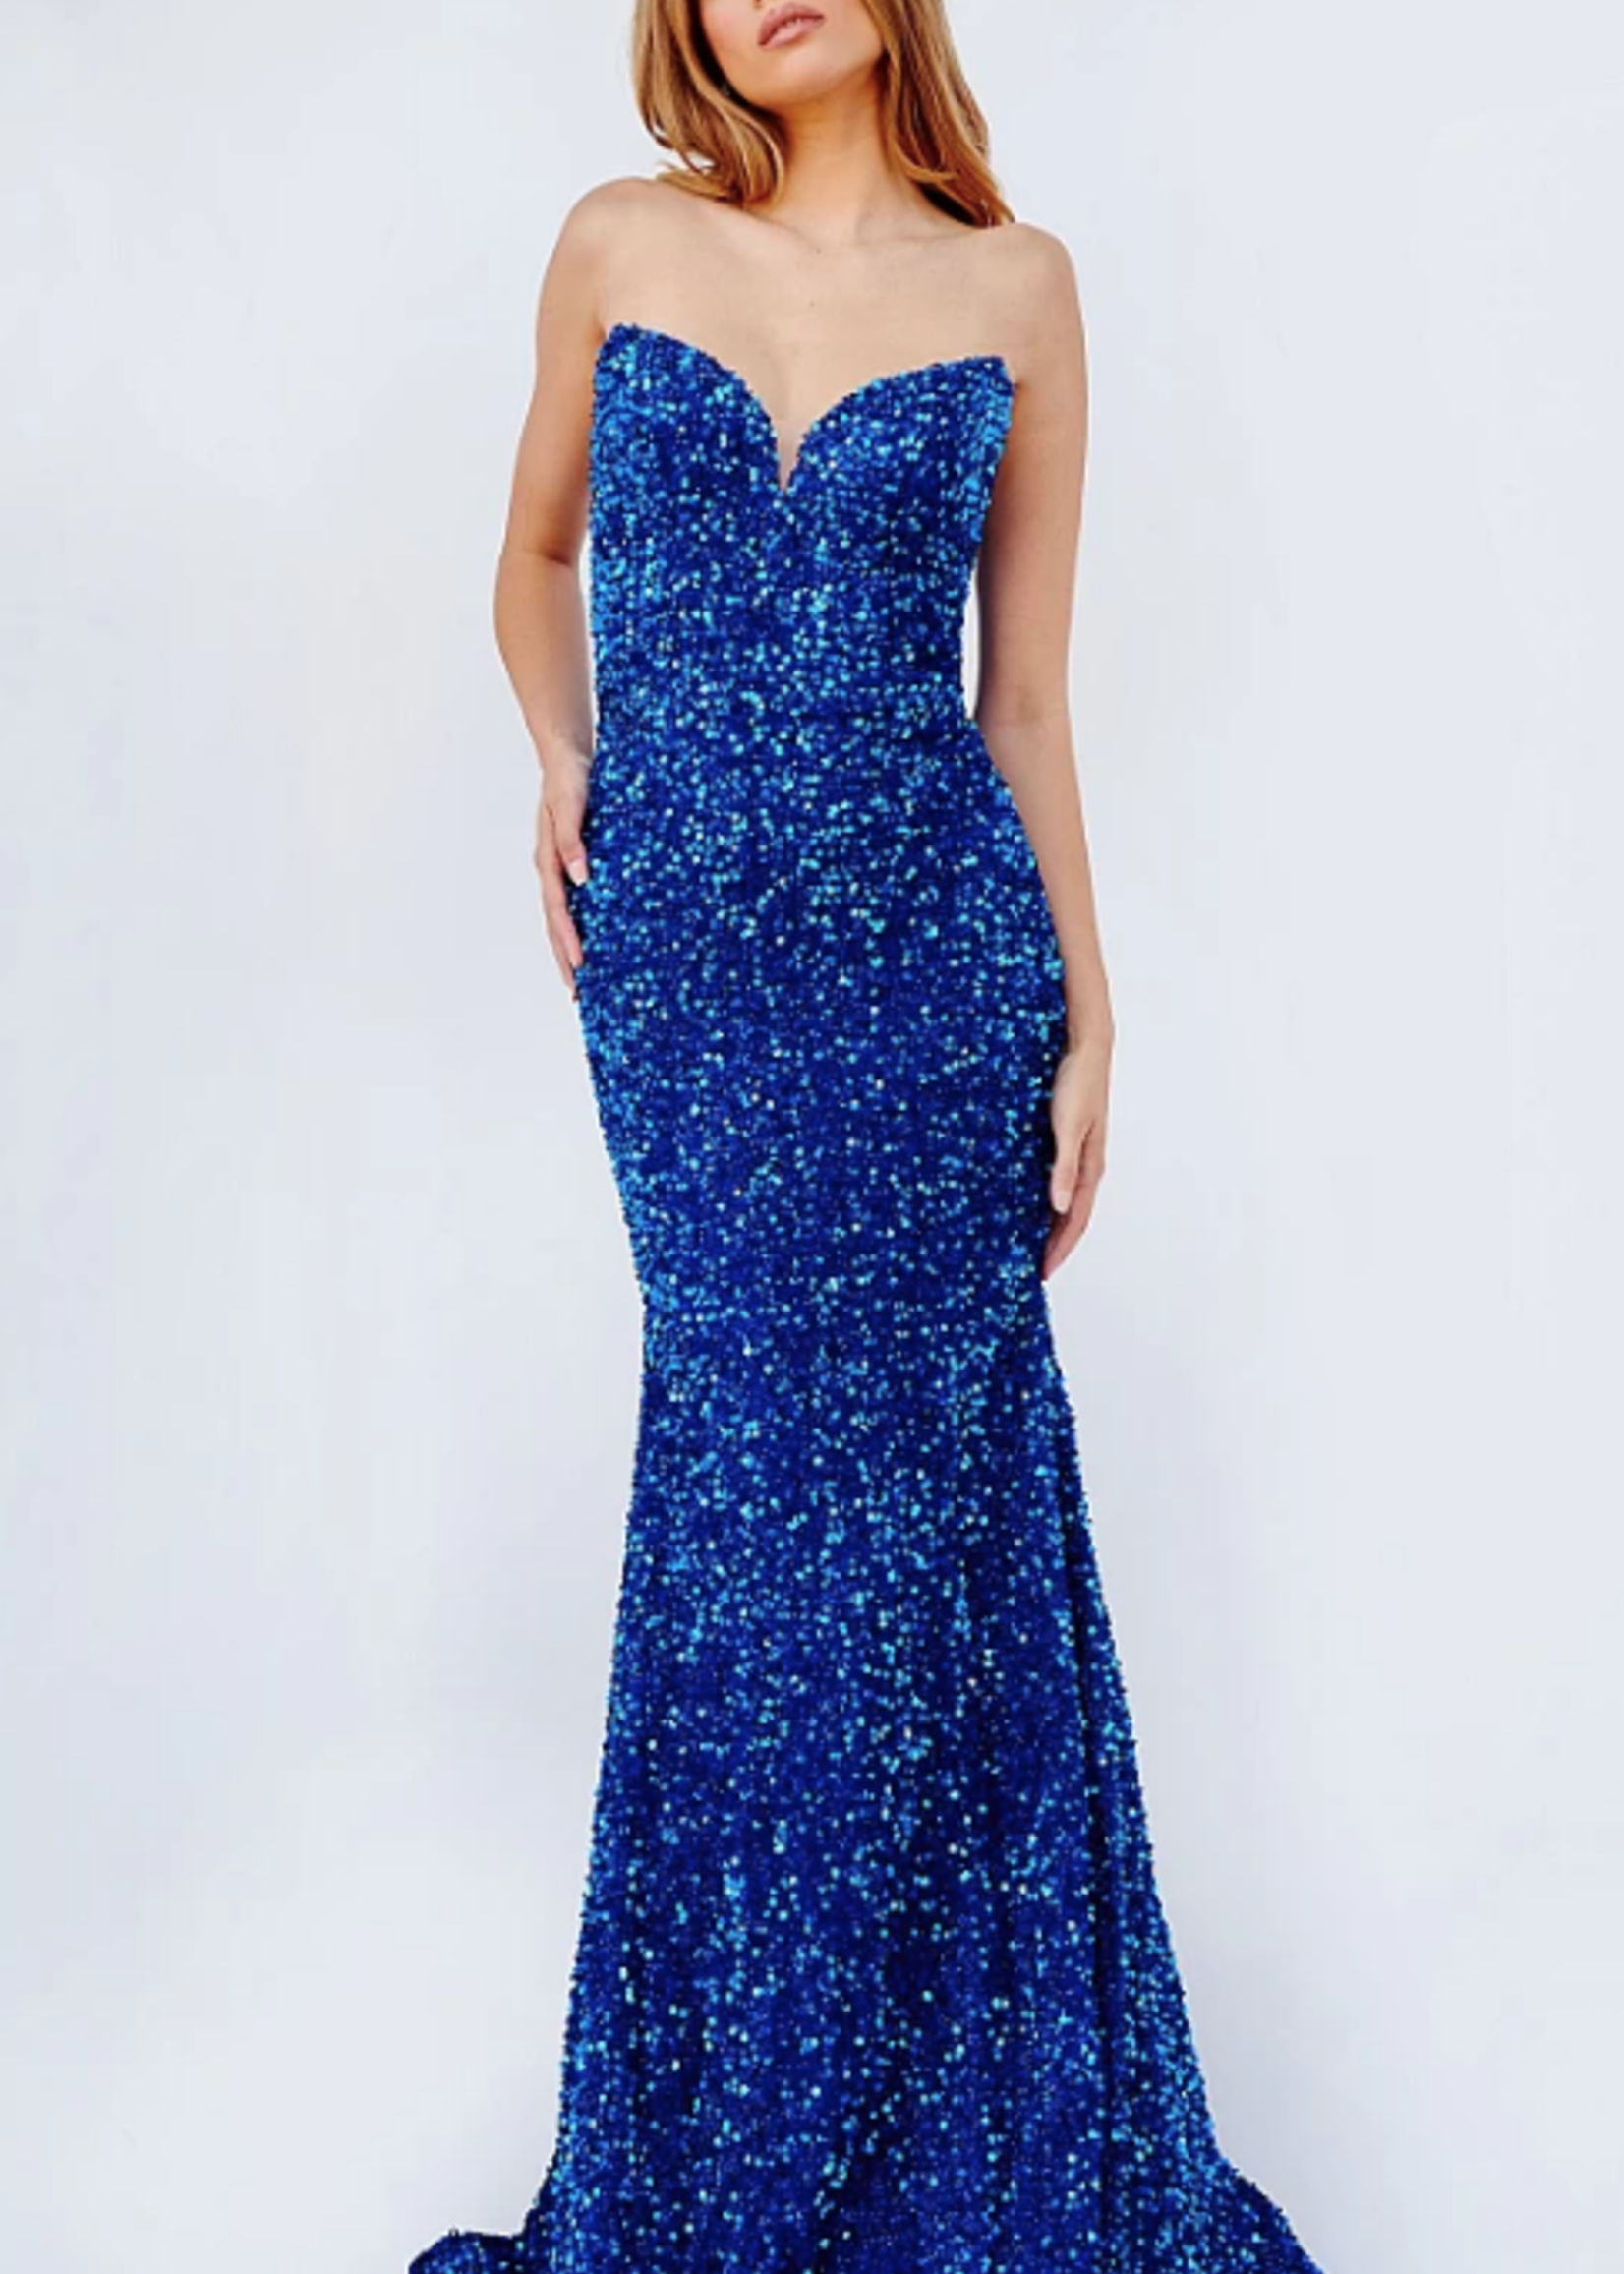 Jovani Night to Remember Formal ( 4 Colors)